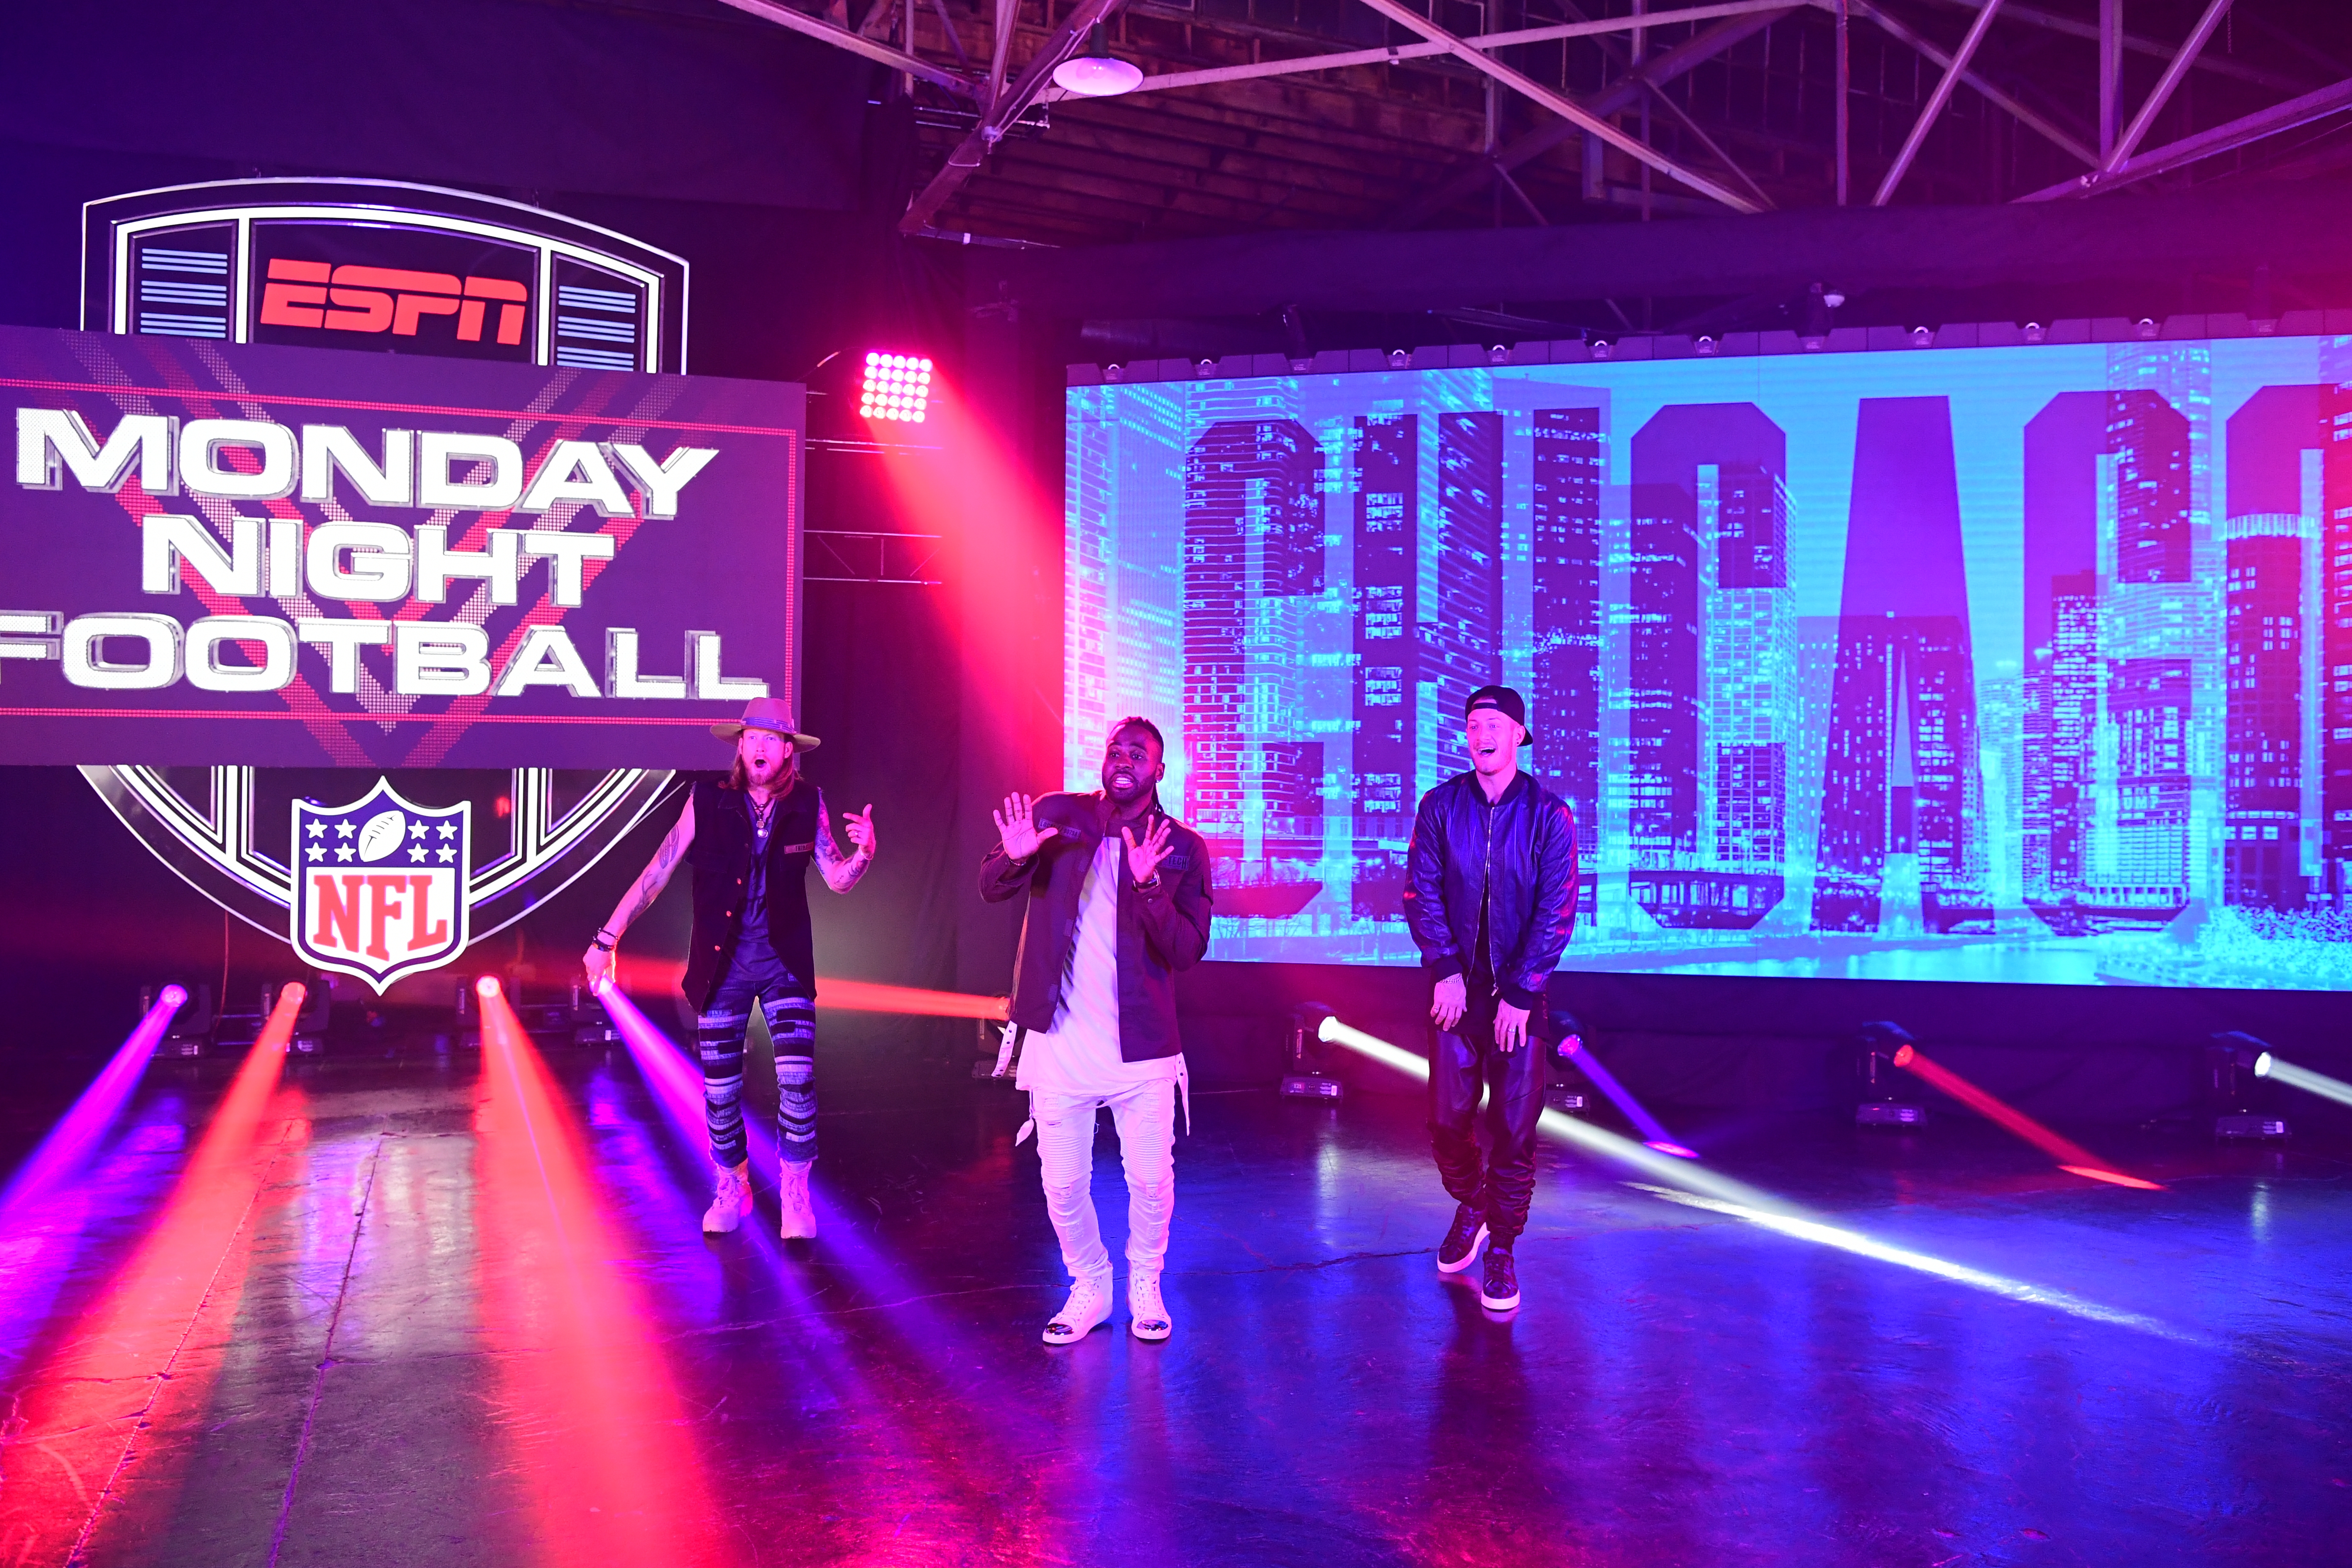 5 things to know about tonight's ESPN Monday Night Football